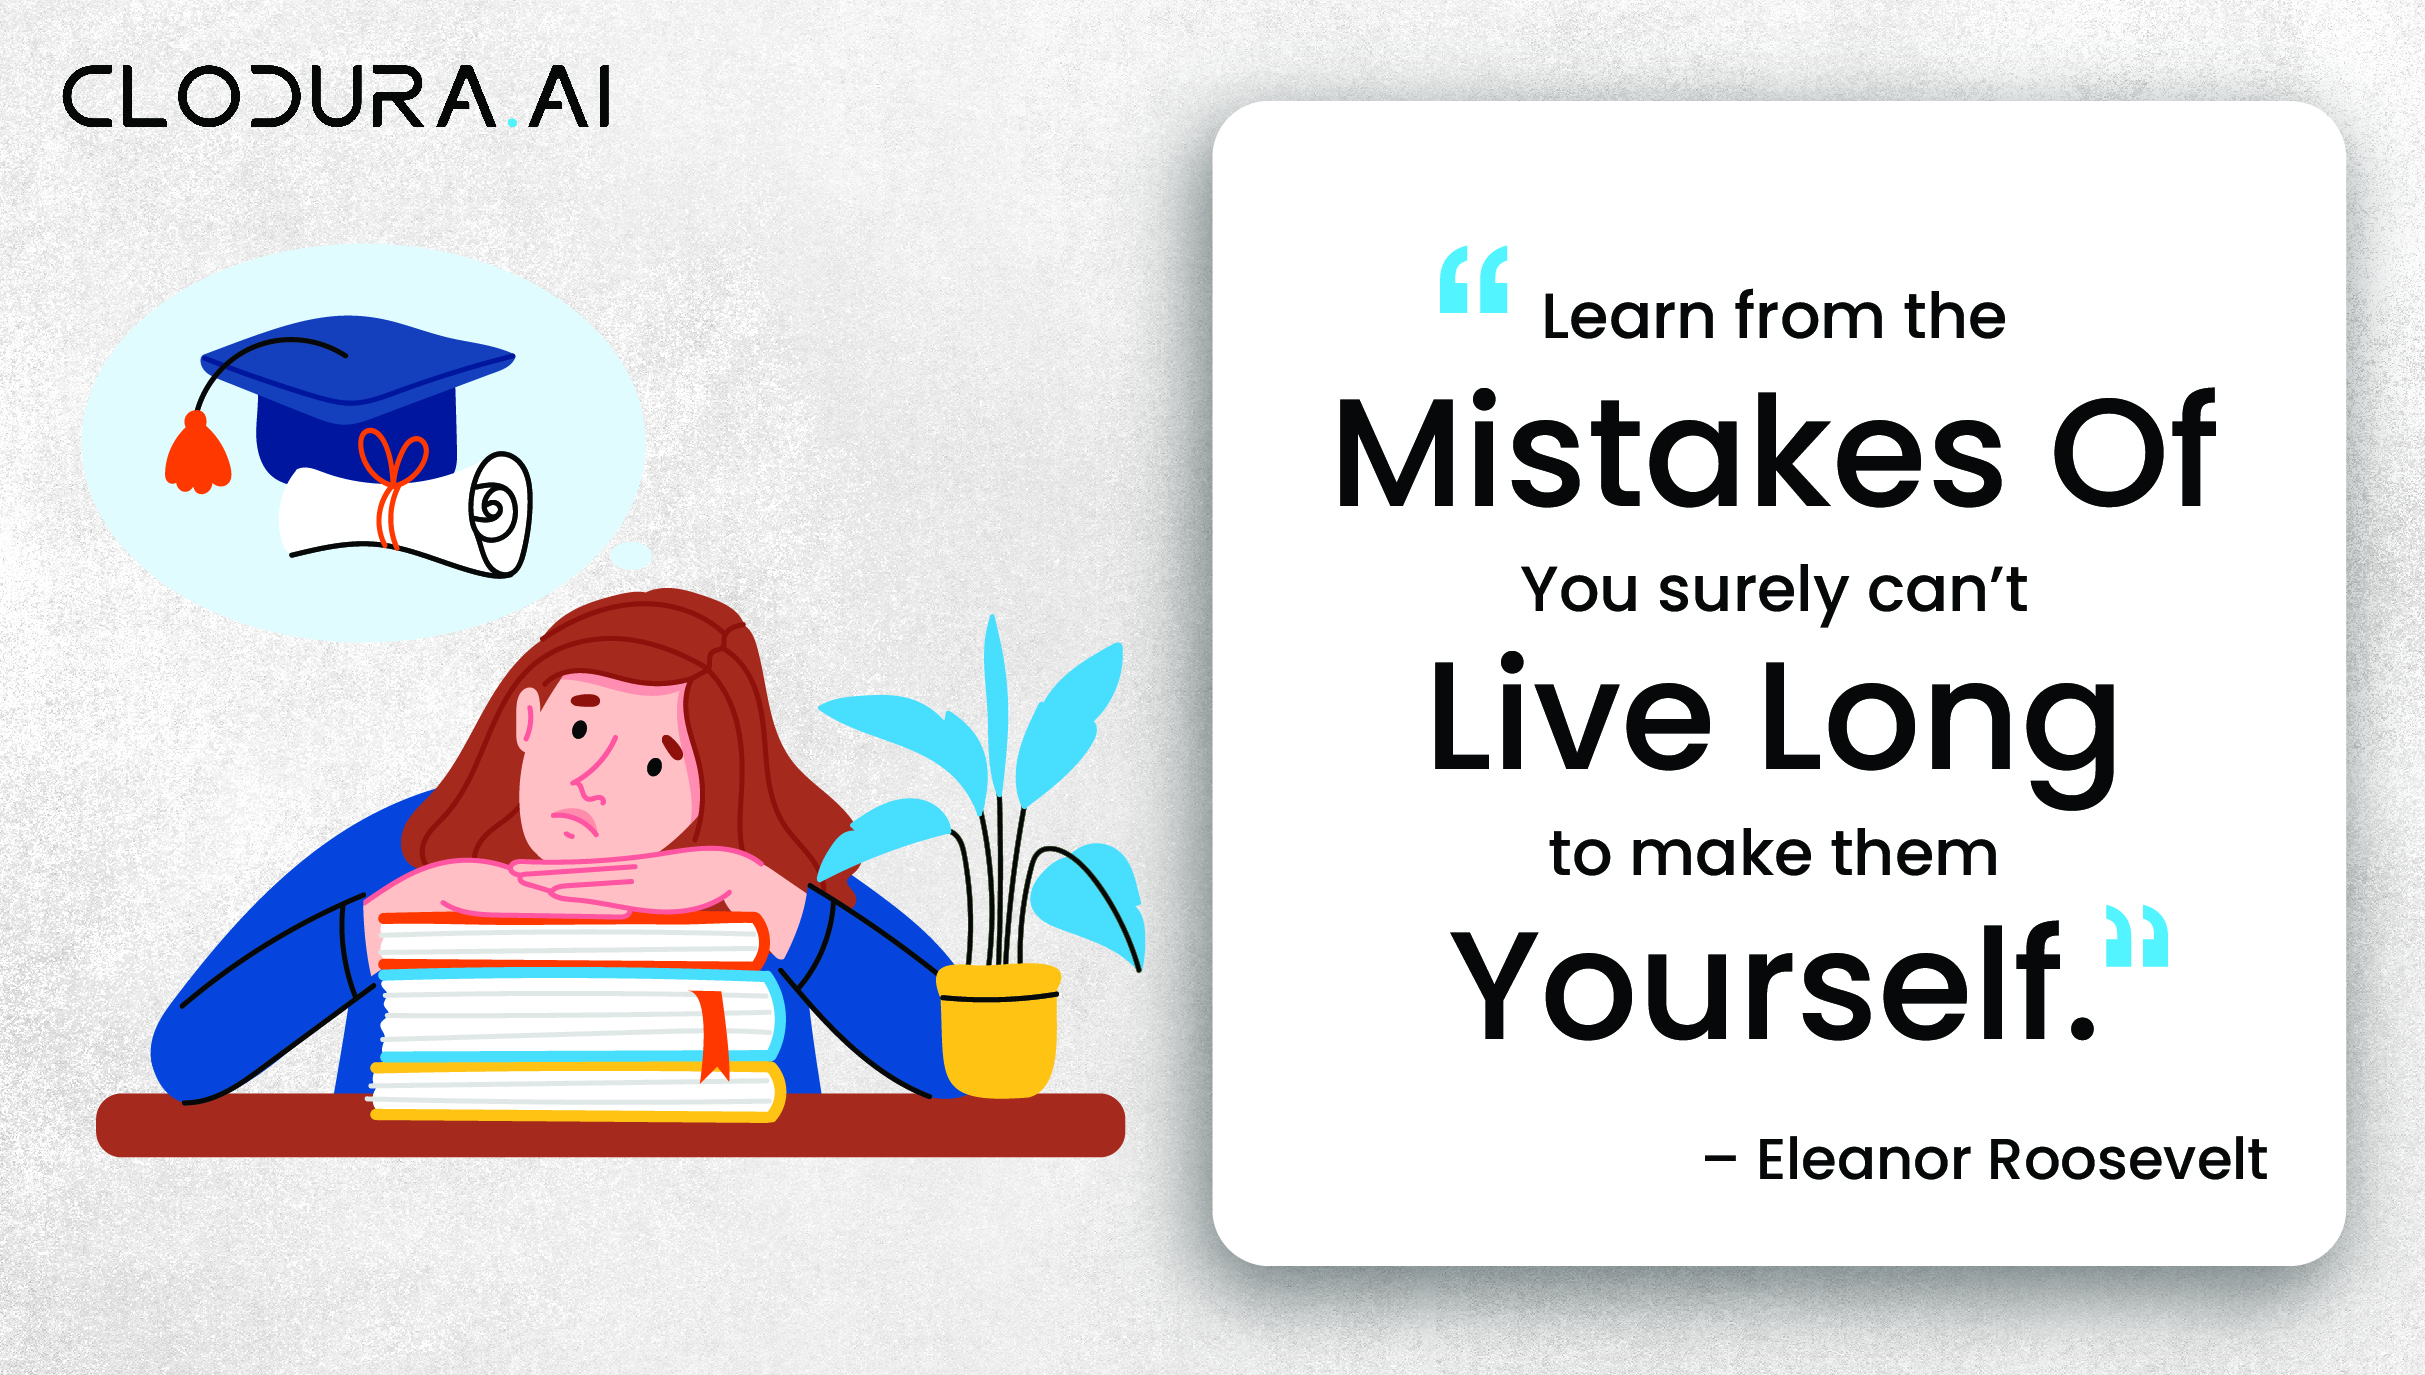 Learn from the mistakes of others. You surely can’t live long enough to make them yourself